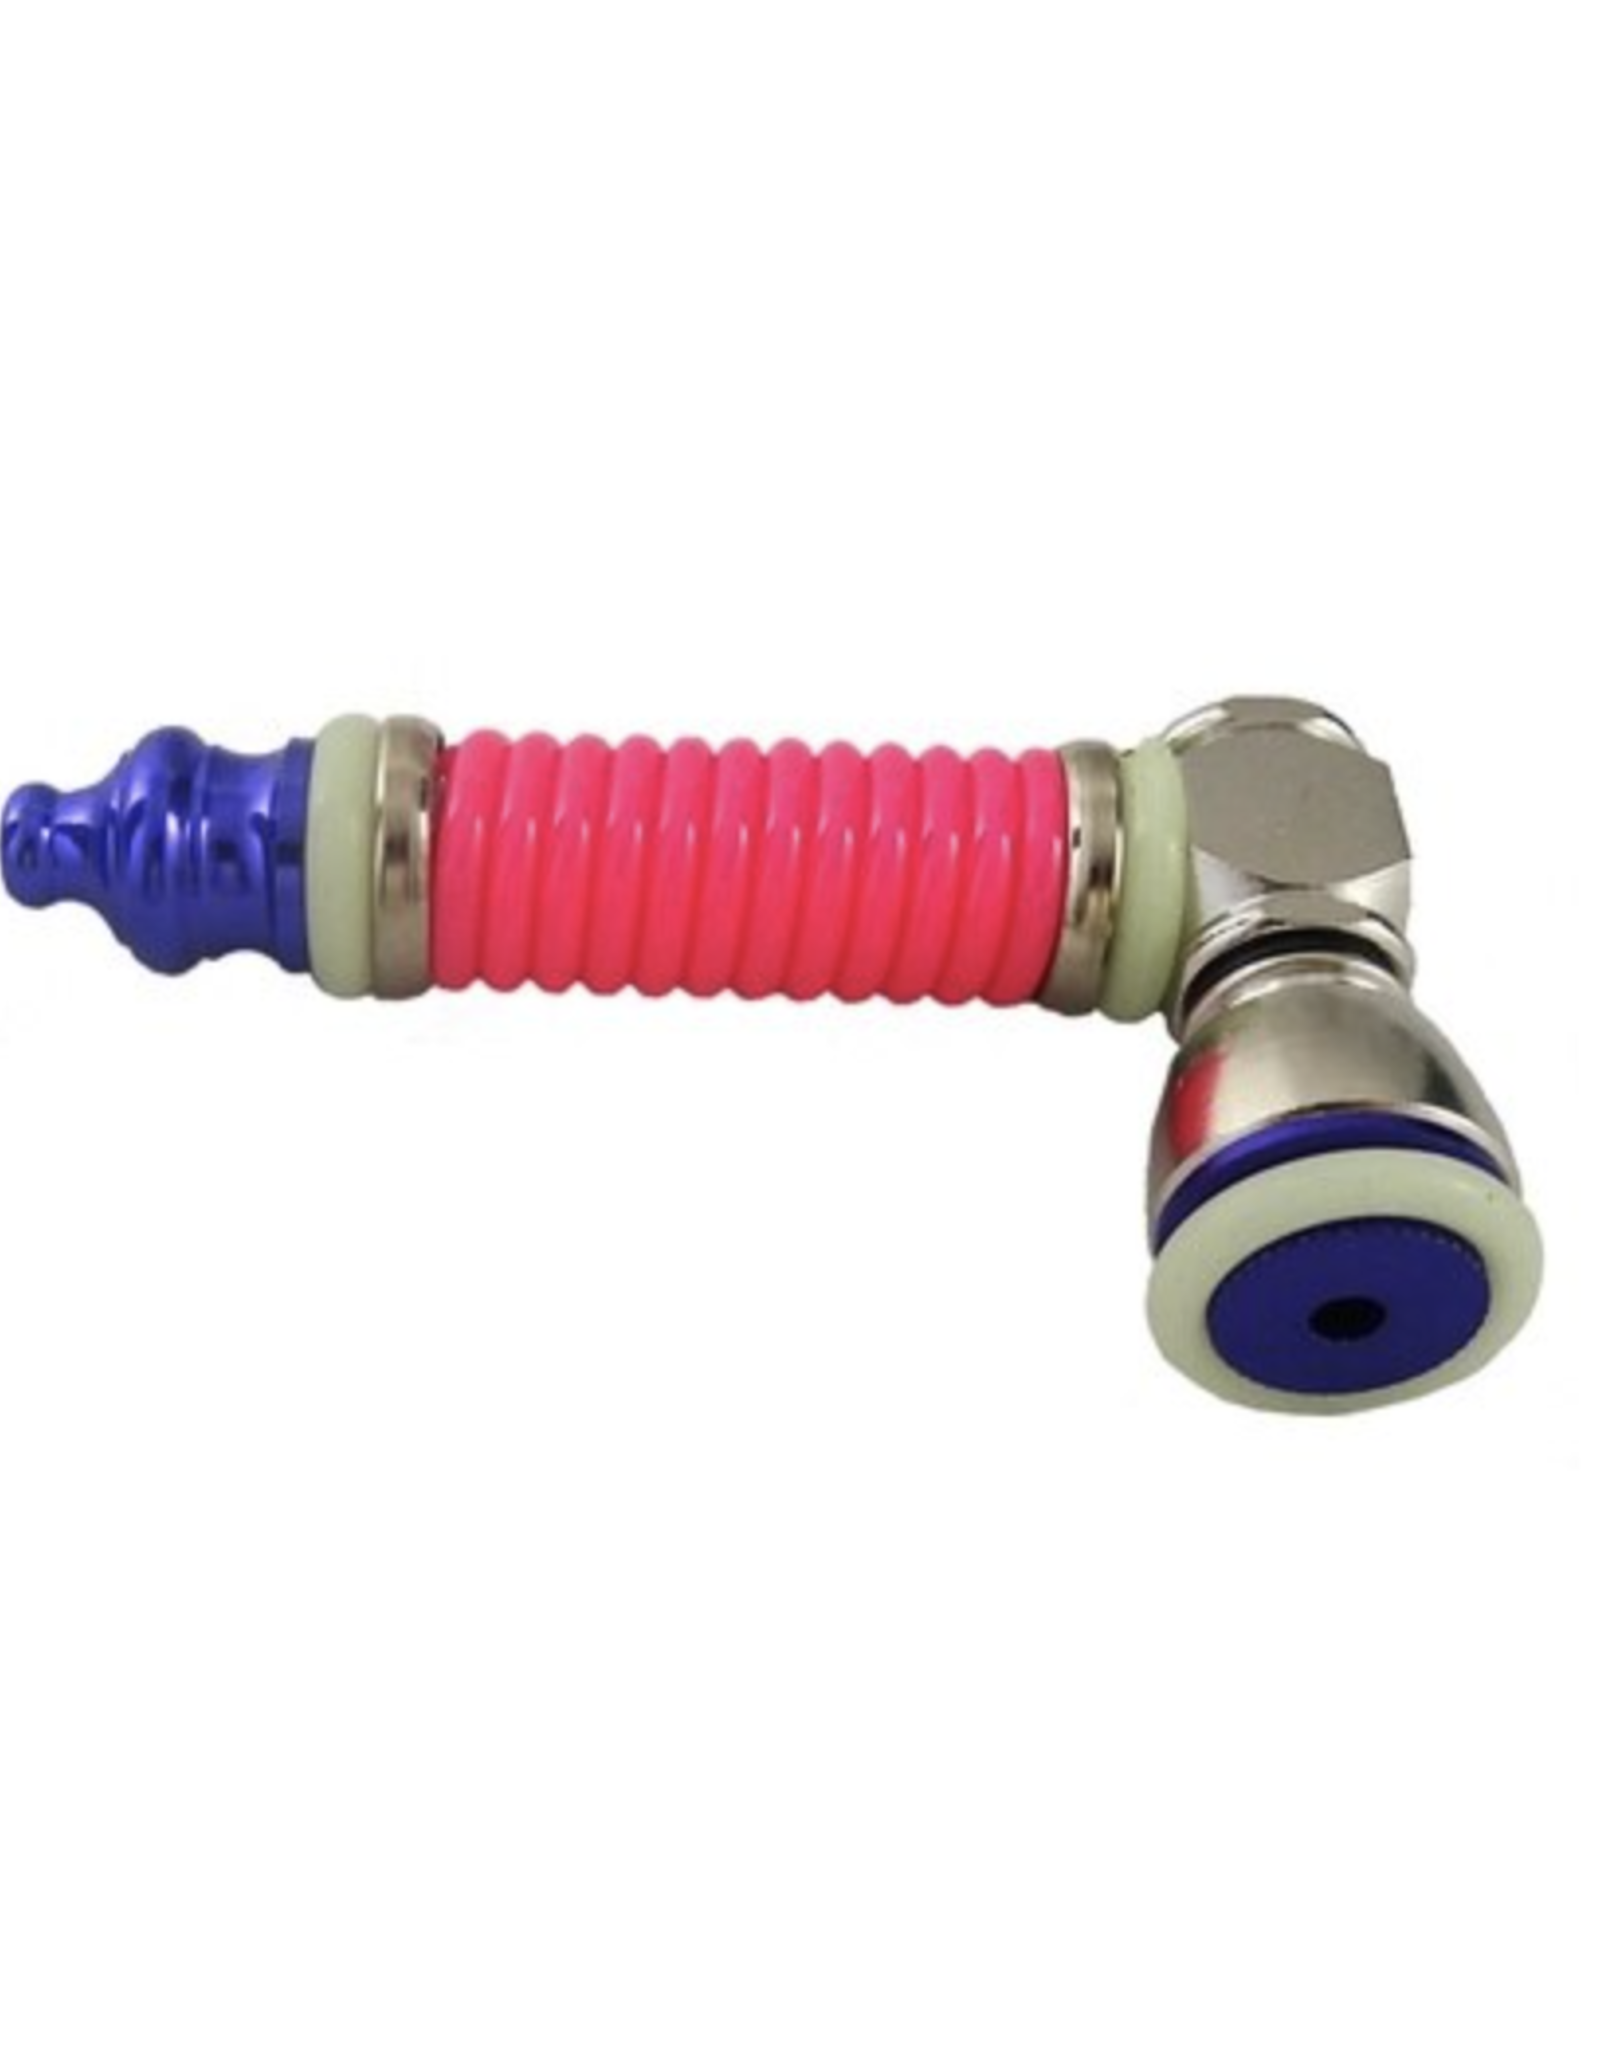 Coilerz 3" Metal Pipe w/ Anodized Coil & Glow-in-the-Dark O-Rings by BIG Pipe